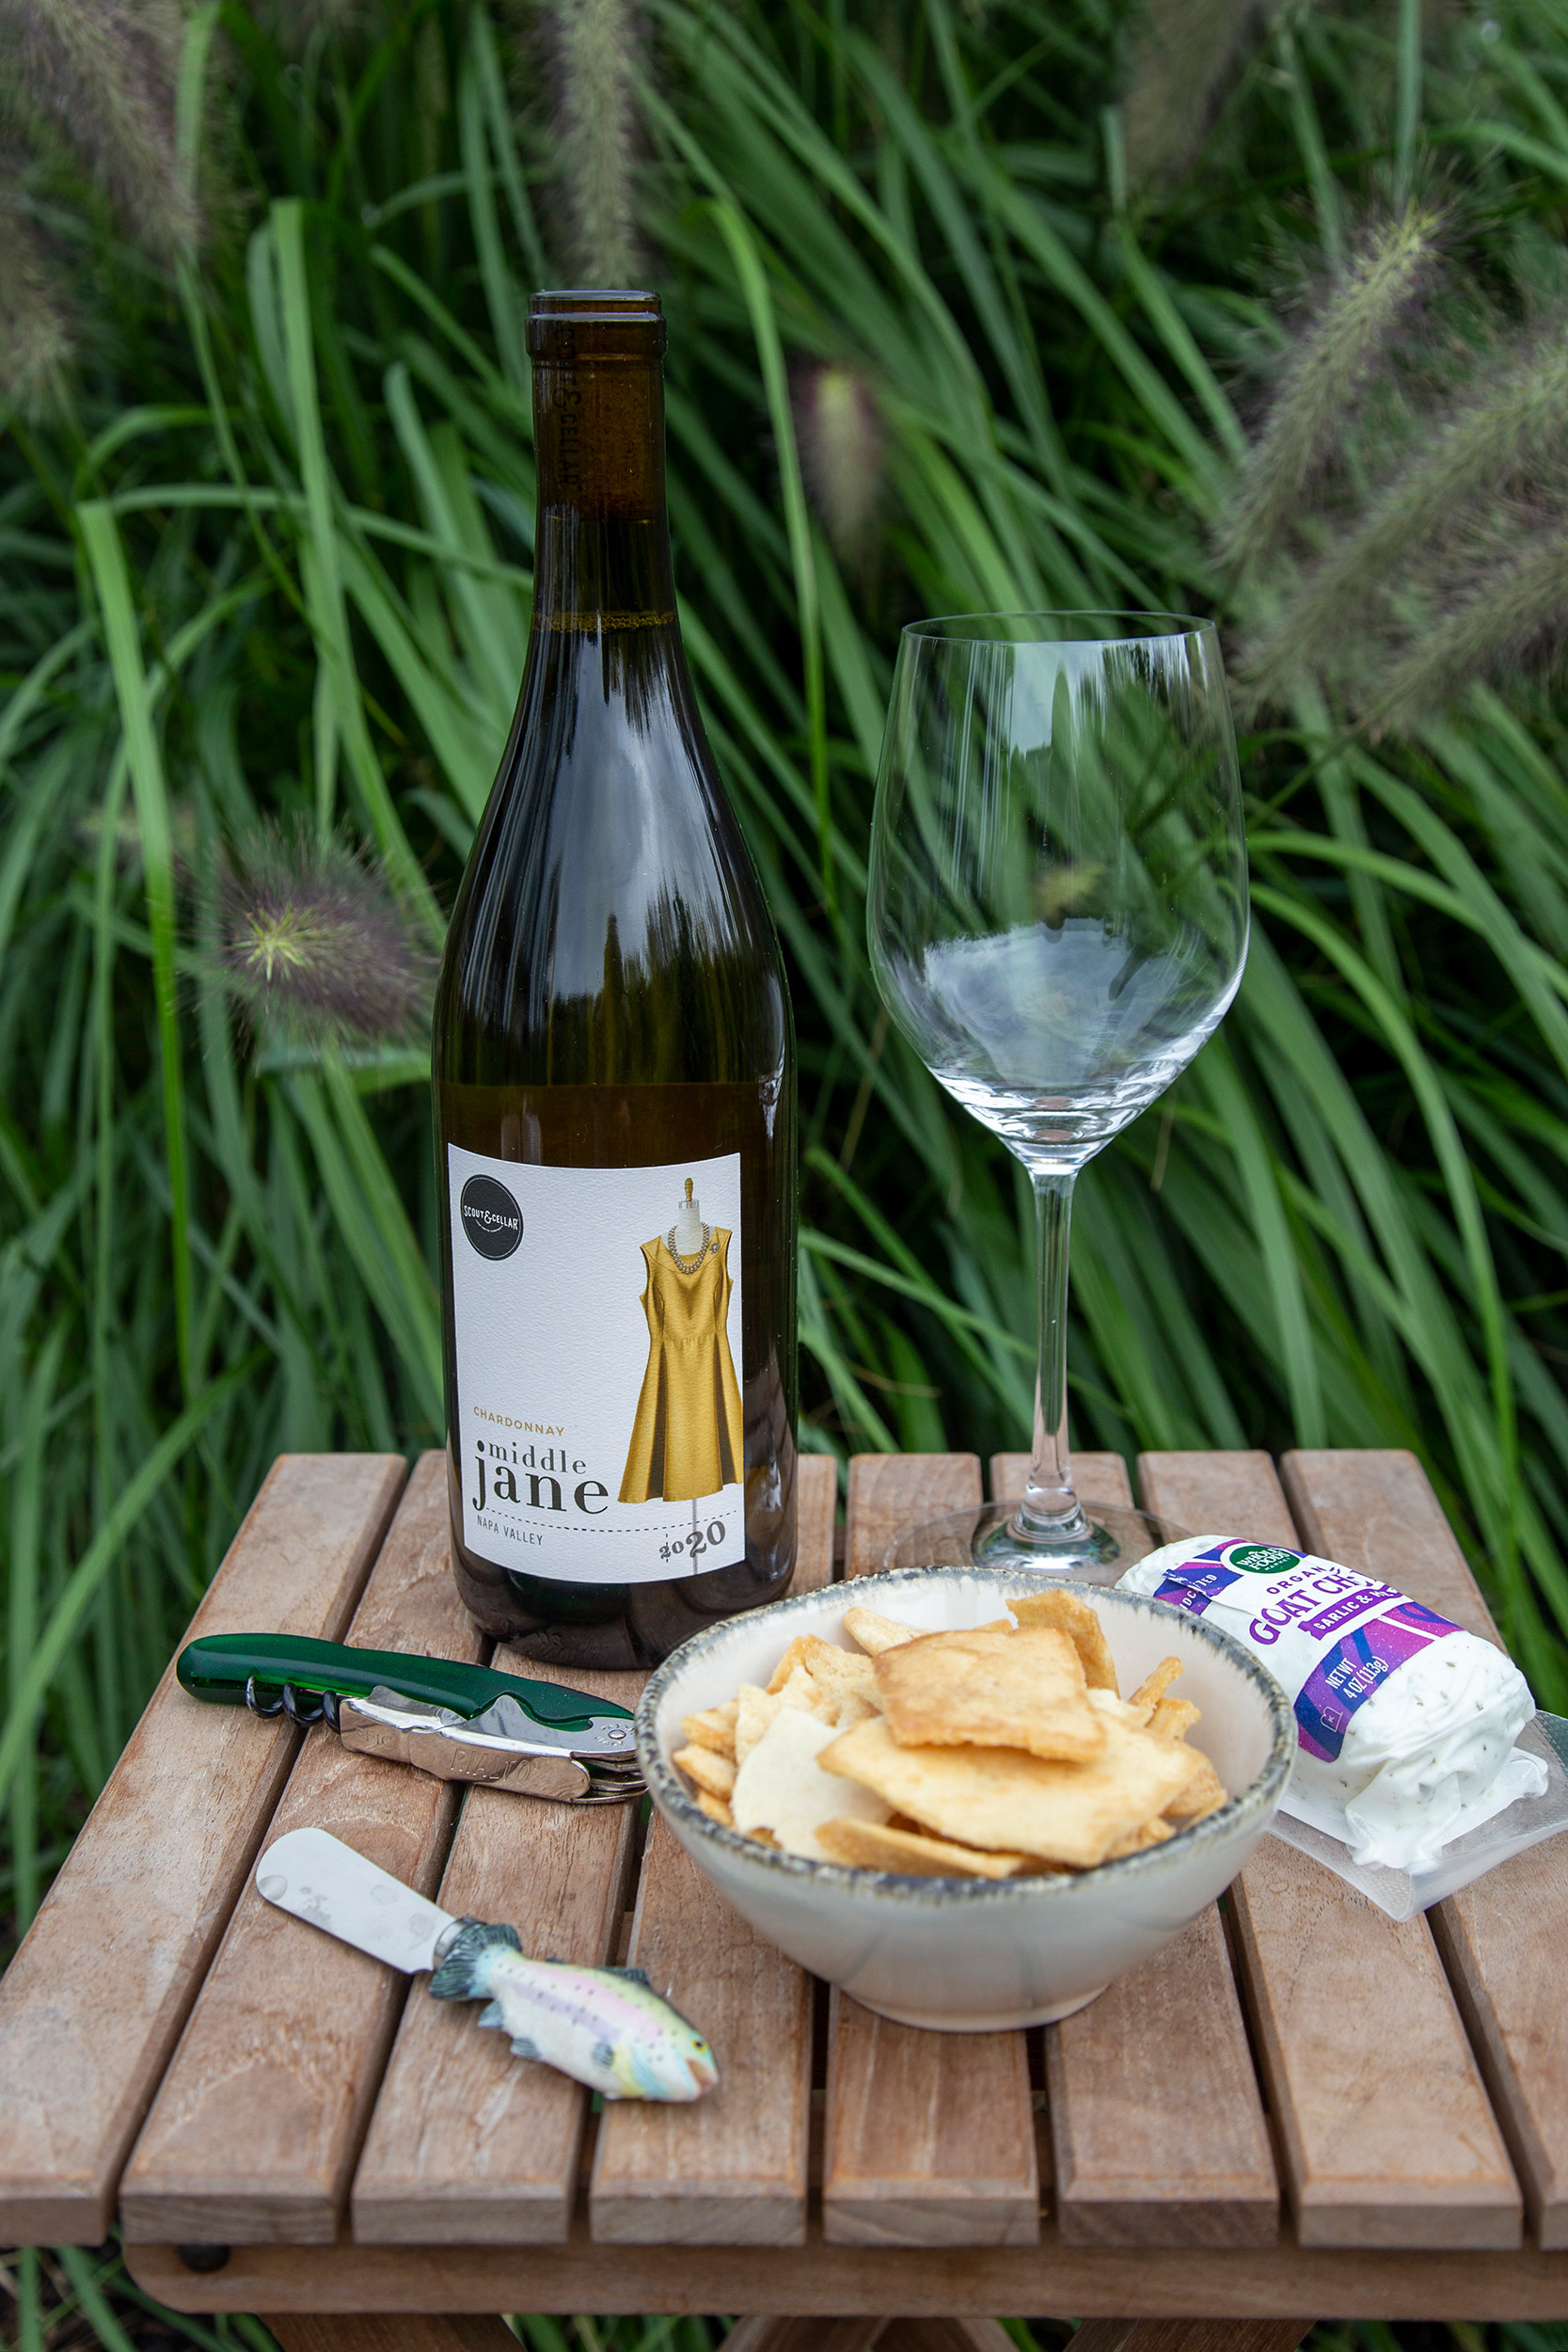 A bottle of wine sitting on a small wooden table with a wine glass, goat cheese, a bottle opener, a cheese knife and a small bowl of pita chips